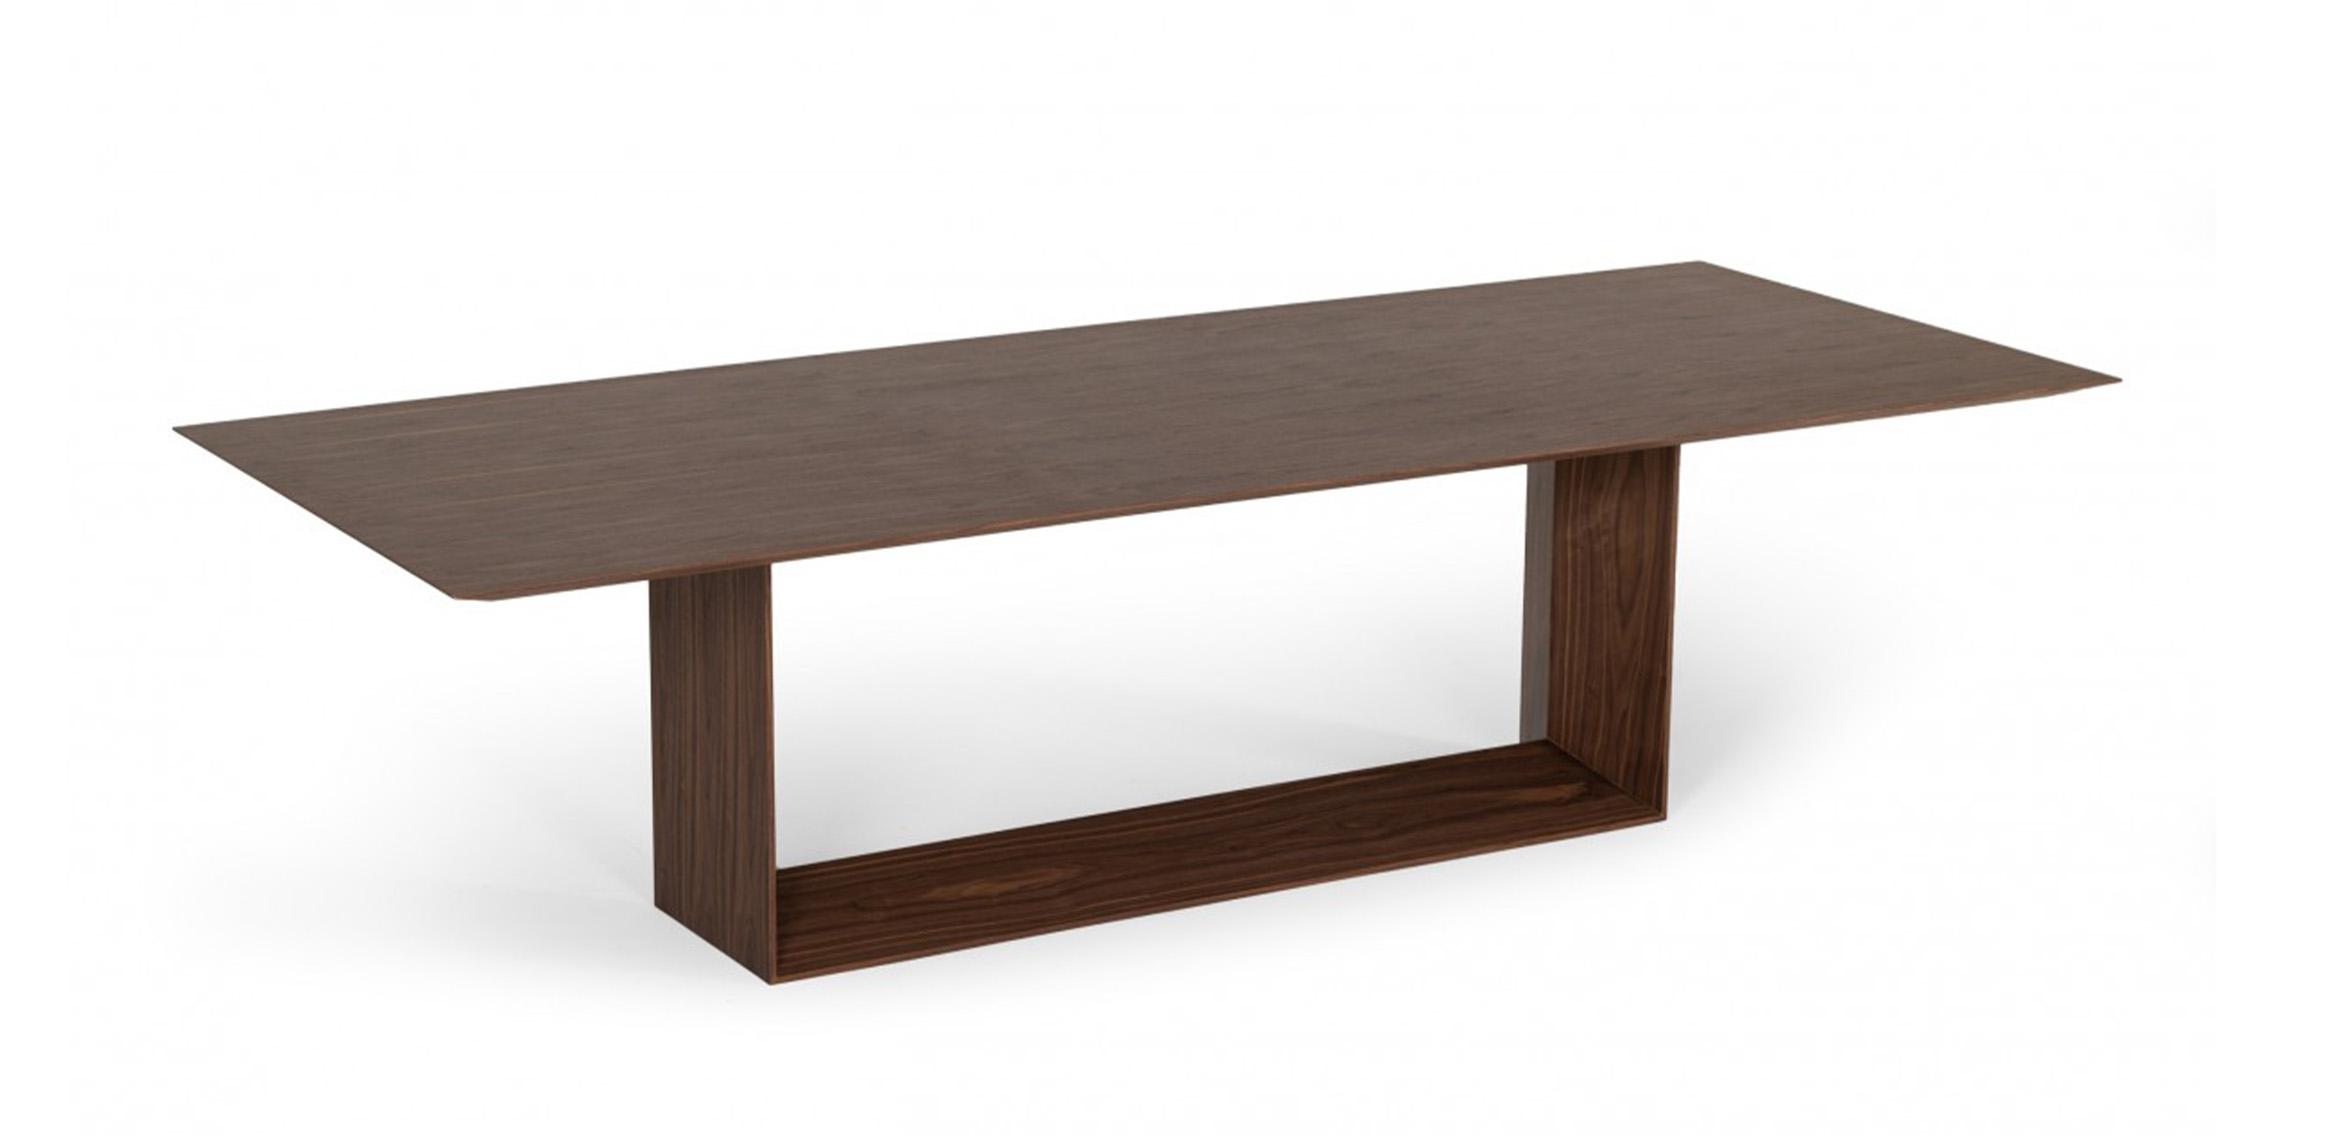 Contemporary, Modern Dining Table VGBBMI2006T-WAL-DT VGBBMI2006T-WAL-DT in Walnut 